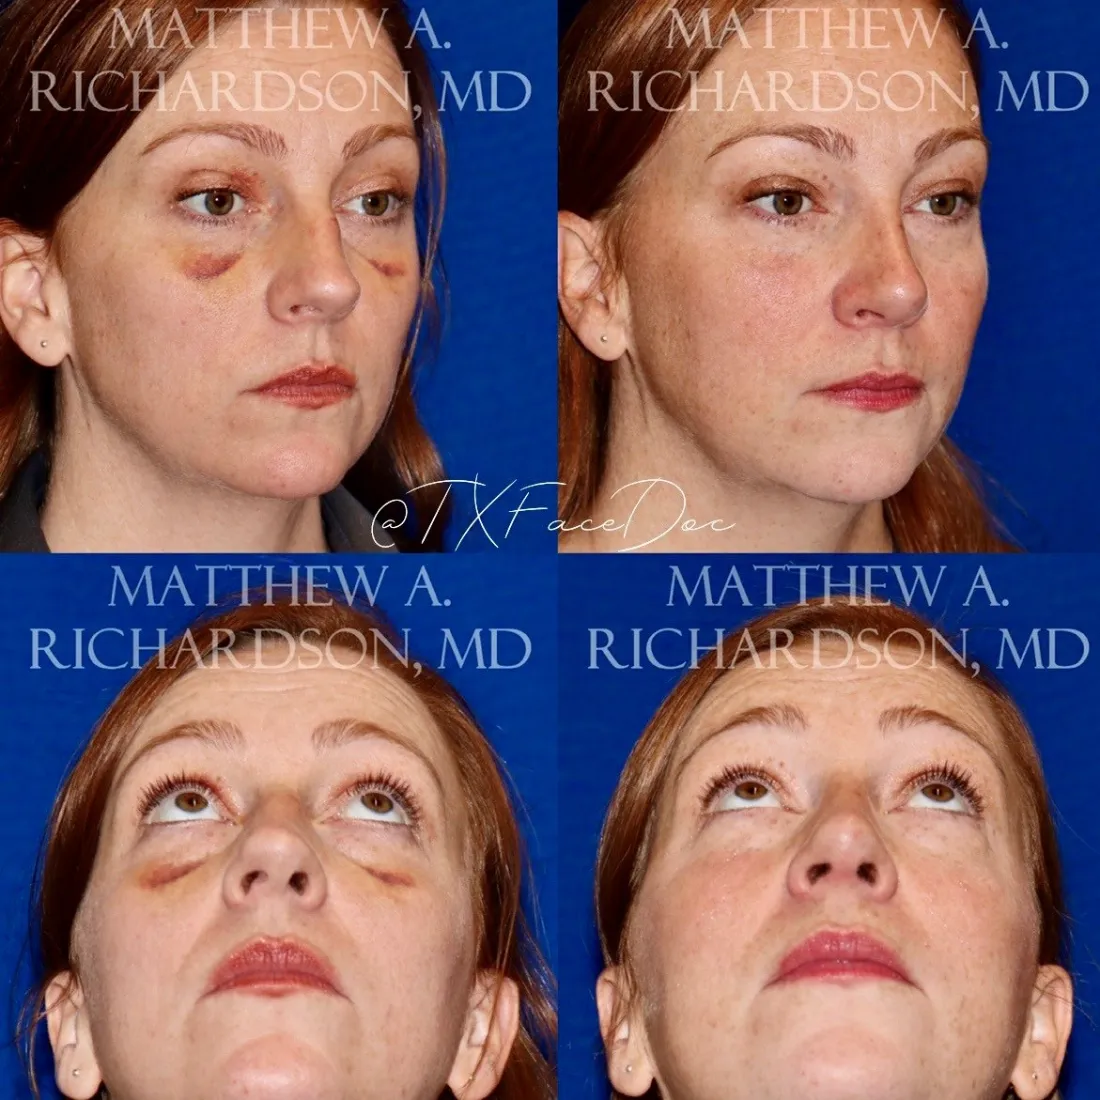 Facial Trauma before and after performed by Matthew A. Richardson, MD